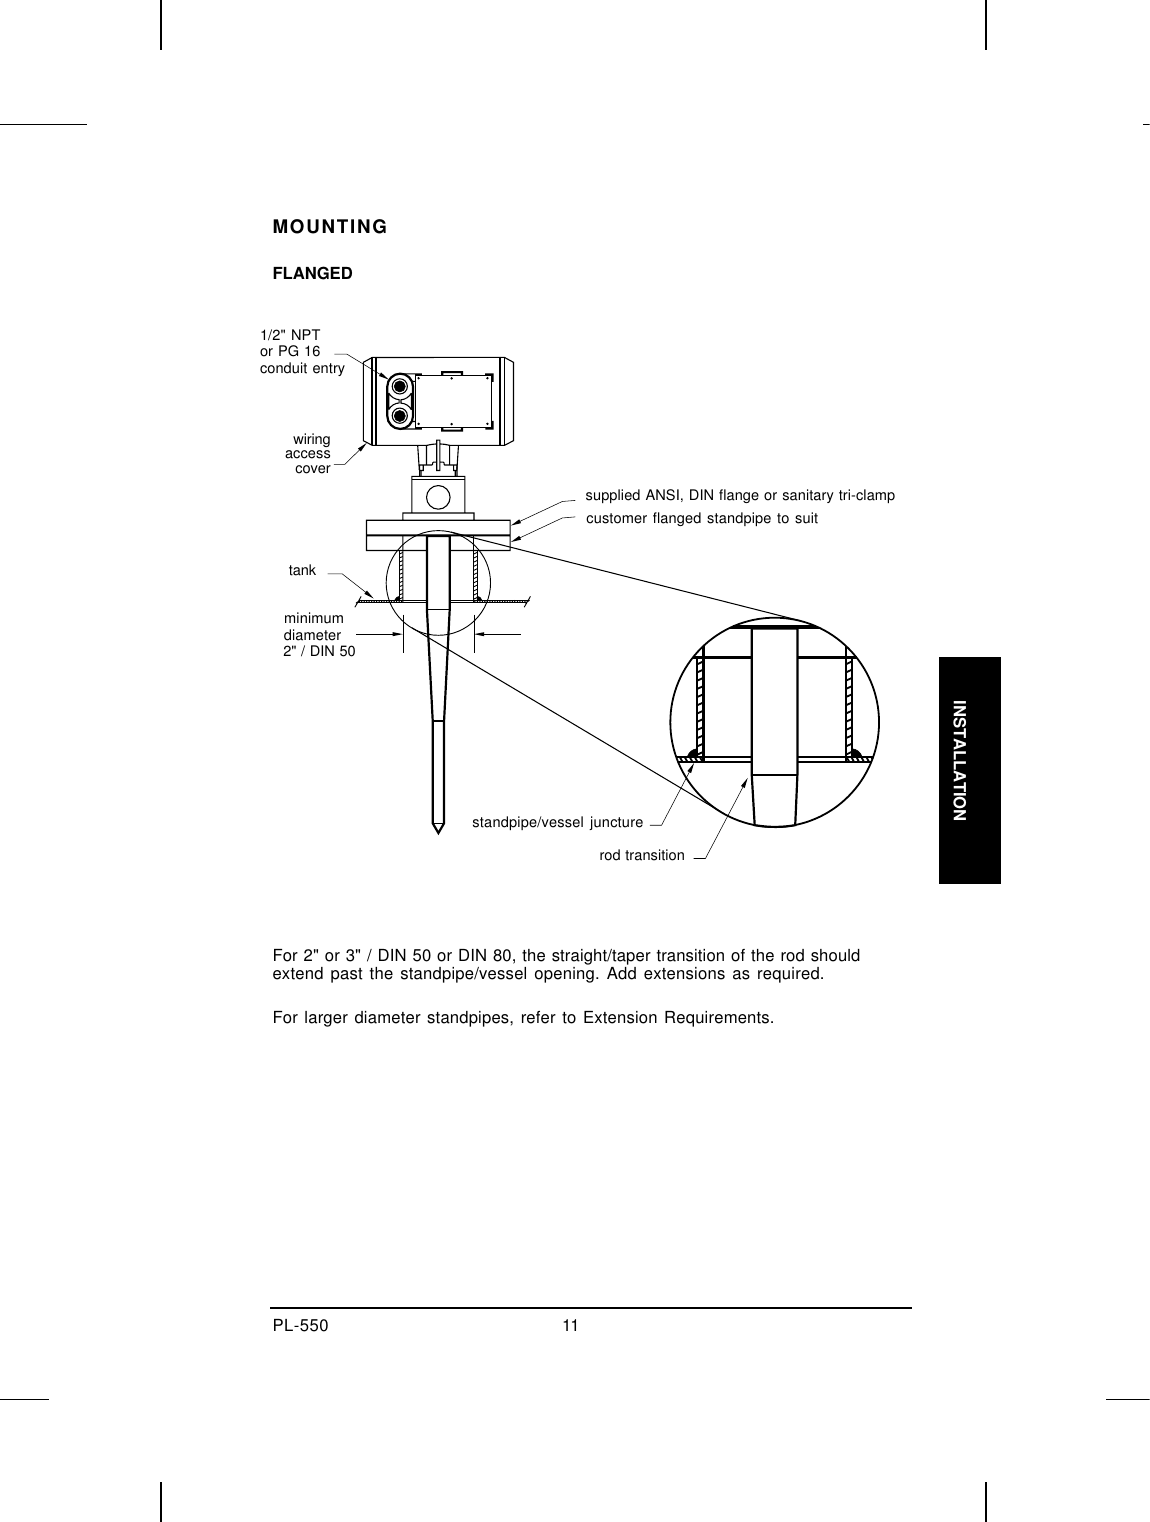 _PL-550 11 INSTALLATION _MOUNTINGFLANGED      For 2&quot; or 3&quot; / DIN 50 or DIN 80, the straight/taper transition of the rod shouldextend past the standpipe/vessel opening. Add extensions as required.For larger diameter standpipes, refer to Extension Requirements.1/2&quot; NPTor PG 16conduit entrywiringaccesscover supplied ANSI, DIN flange or sanitary tri-clamp customer flanged standpipe to suit tank minimum  diameter 2&quot; / DIN 50rod transitionstandpipe/vessel juncture